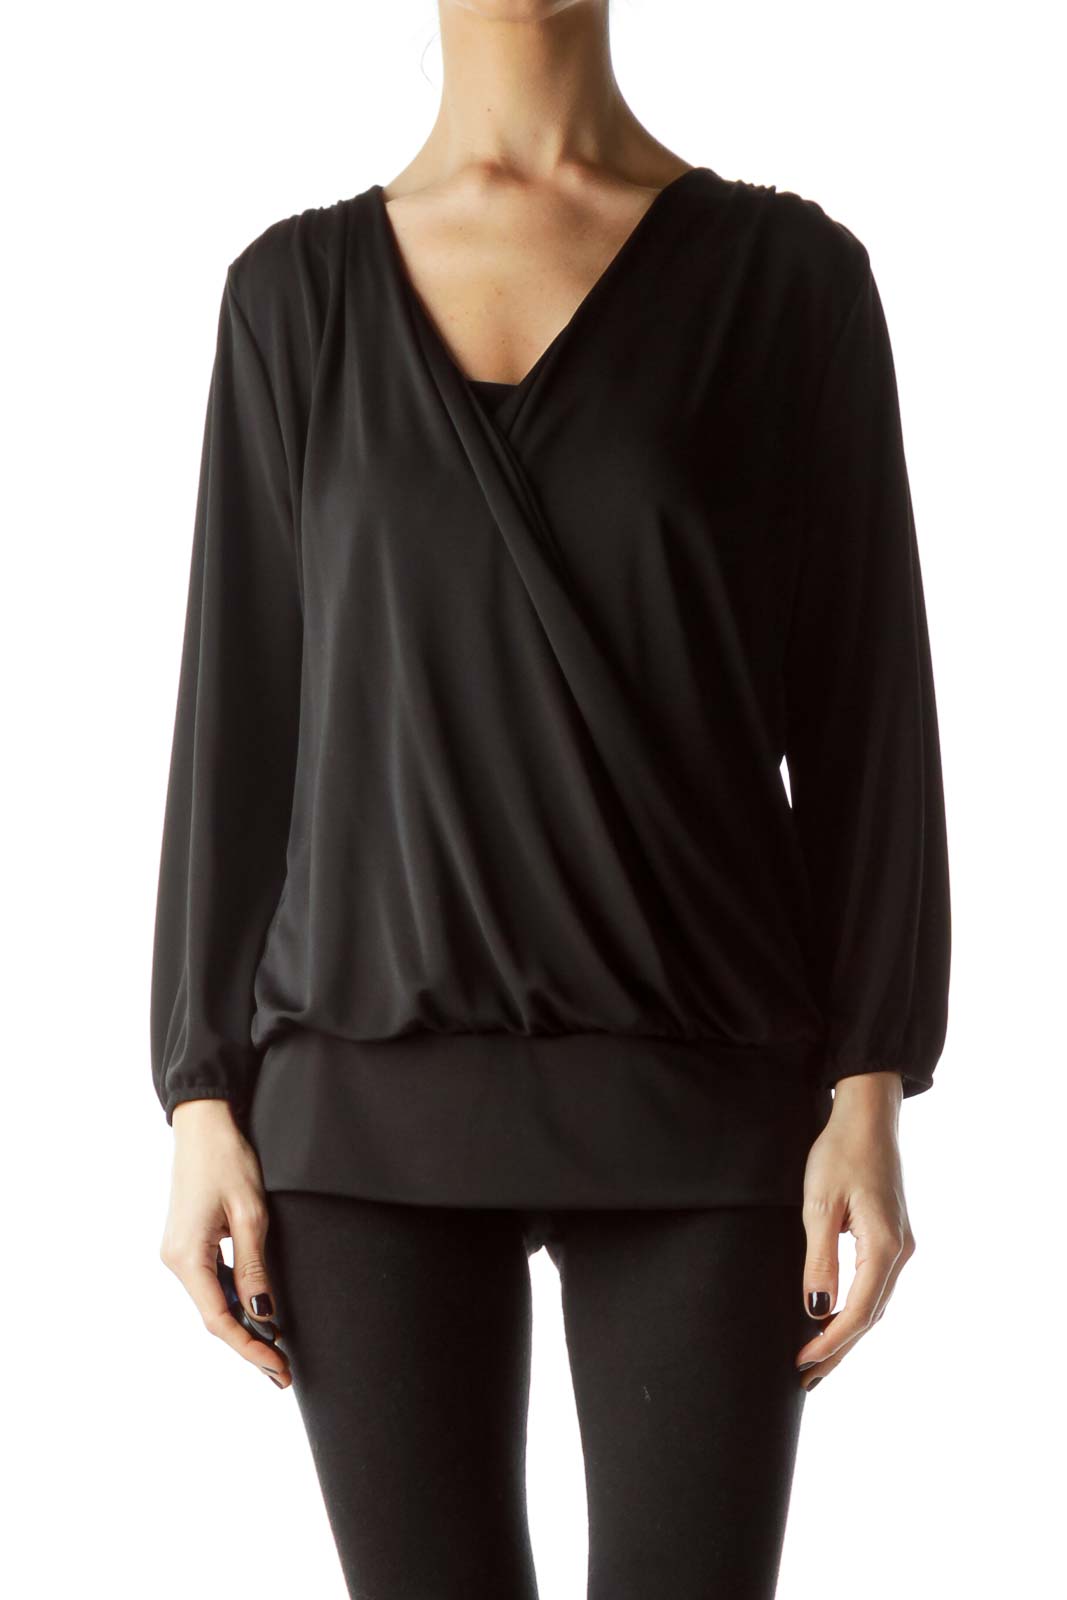 Black Open Front Fitted Long Sleeve Top Front